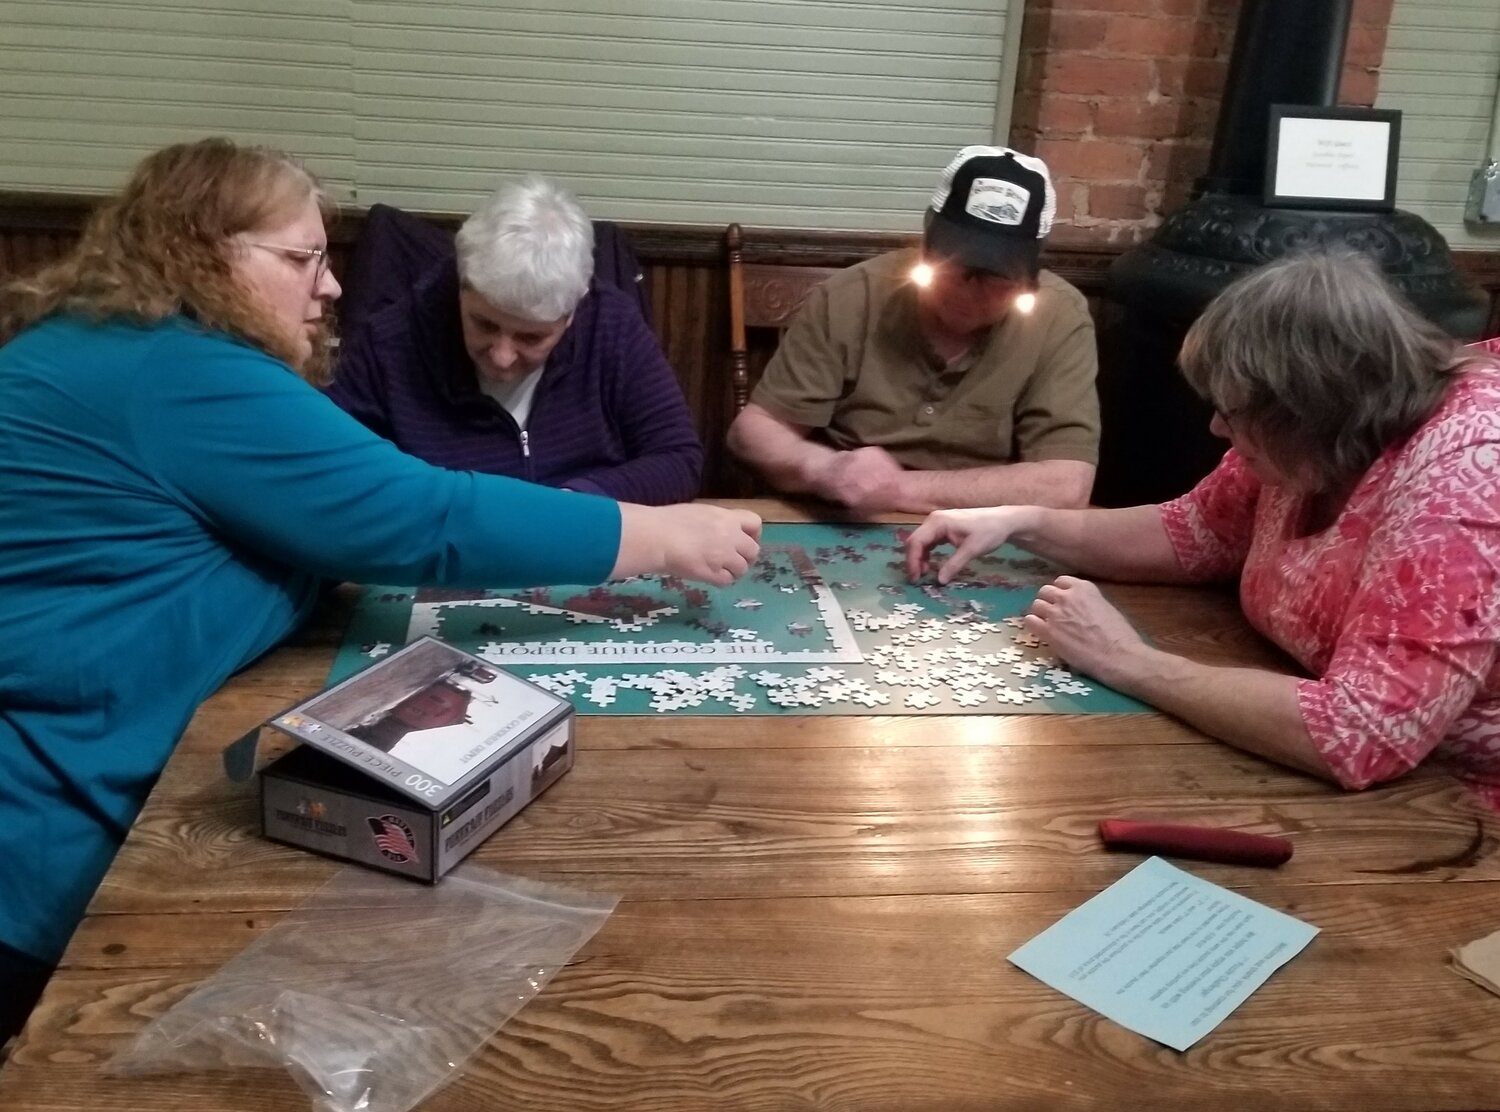 Julie Thermos, Carol Voth, Norrie Voth, and Sally Hadler work as a team to complete their puzzle during competition at The Depot.